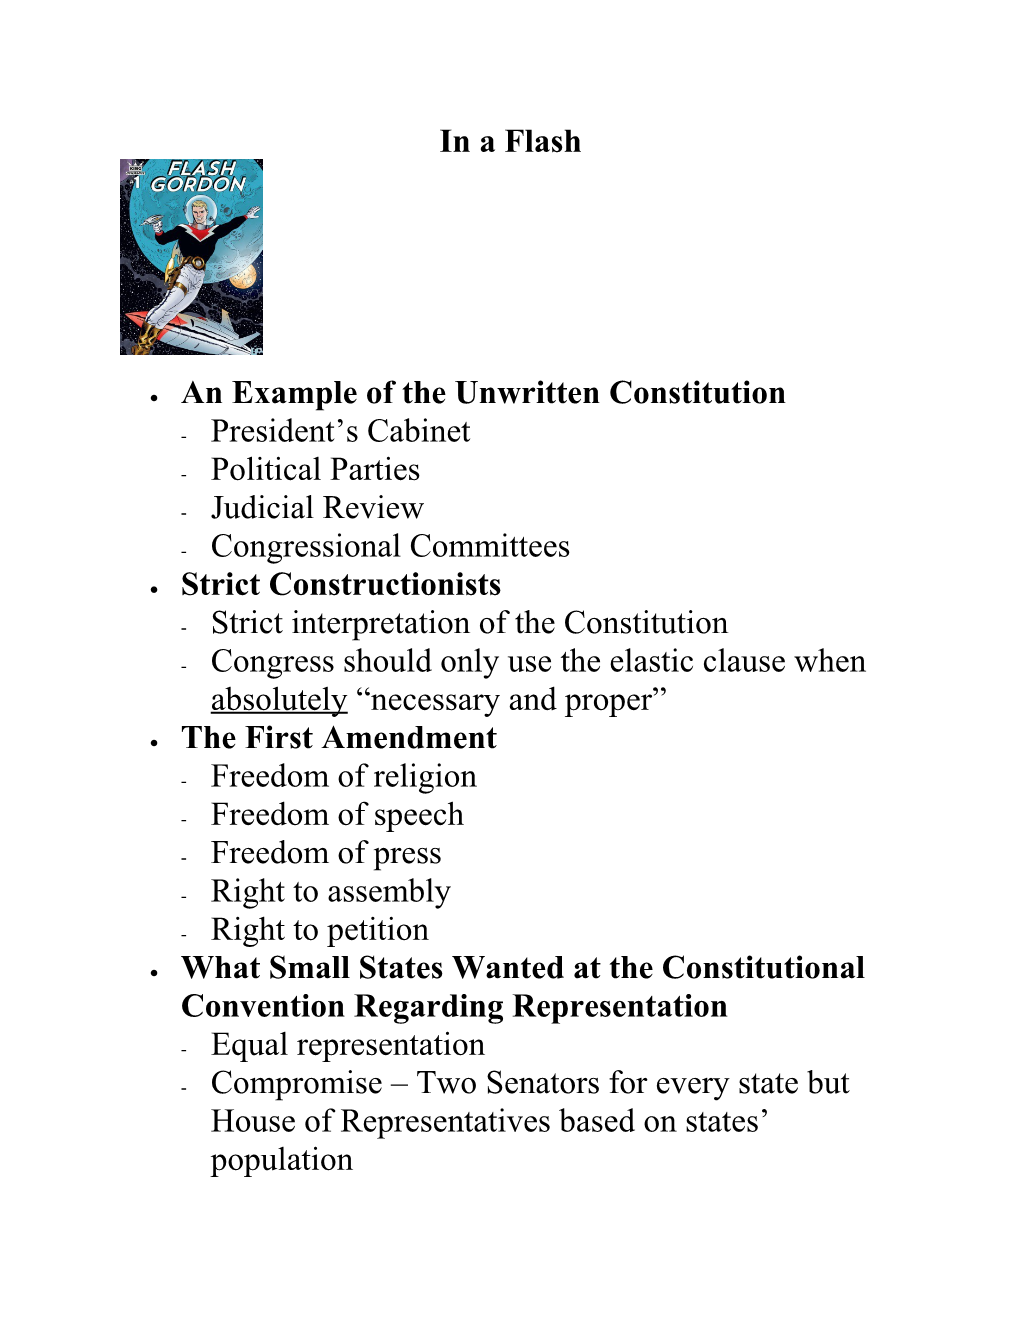 An Example of the Unwritten Constitution